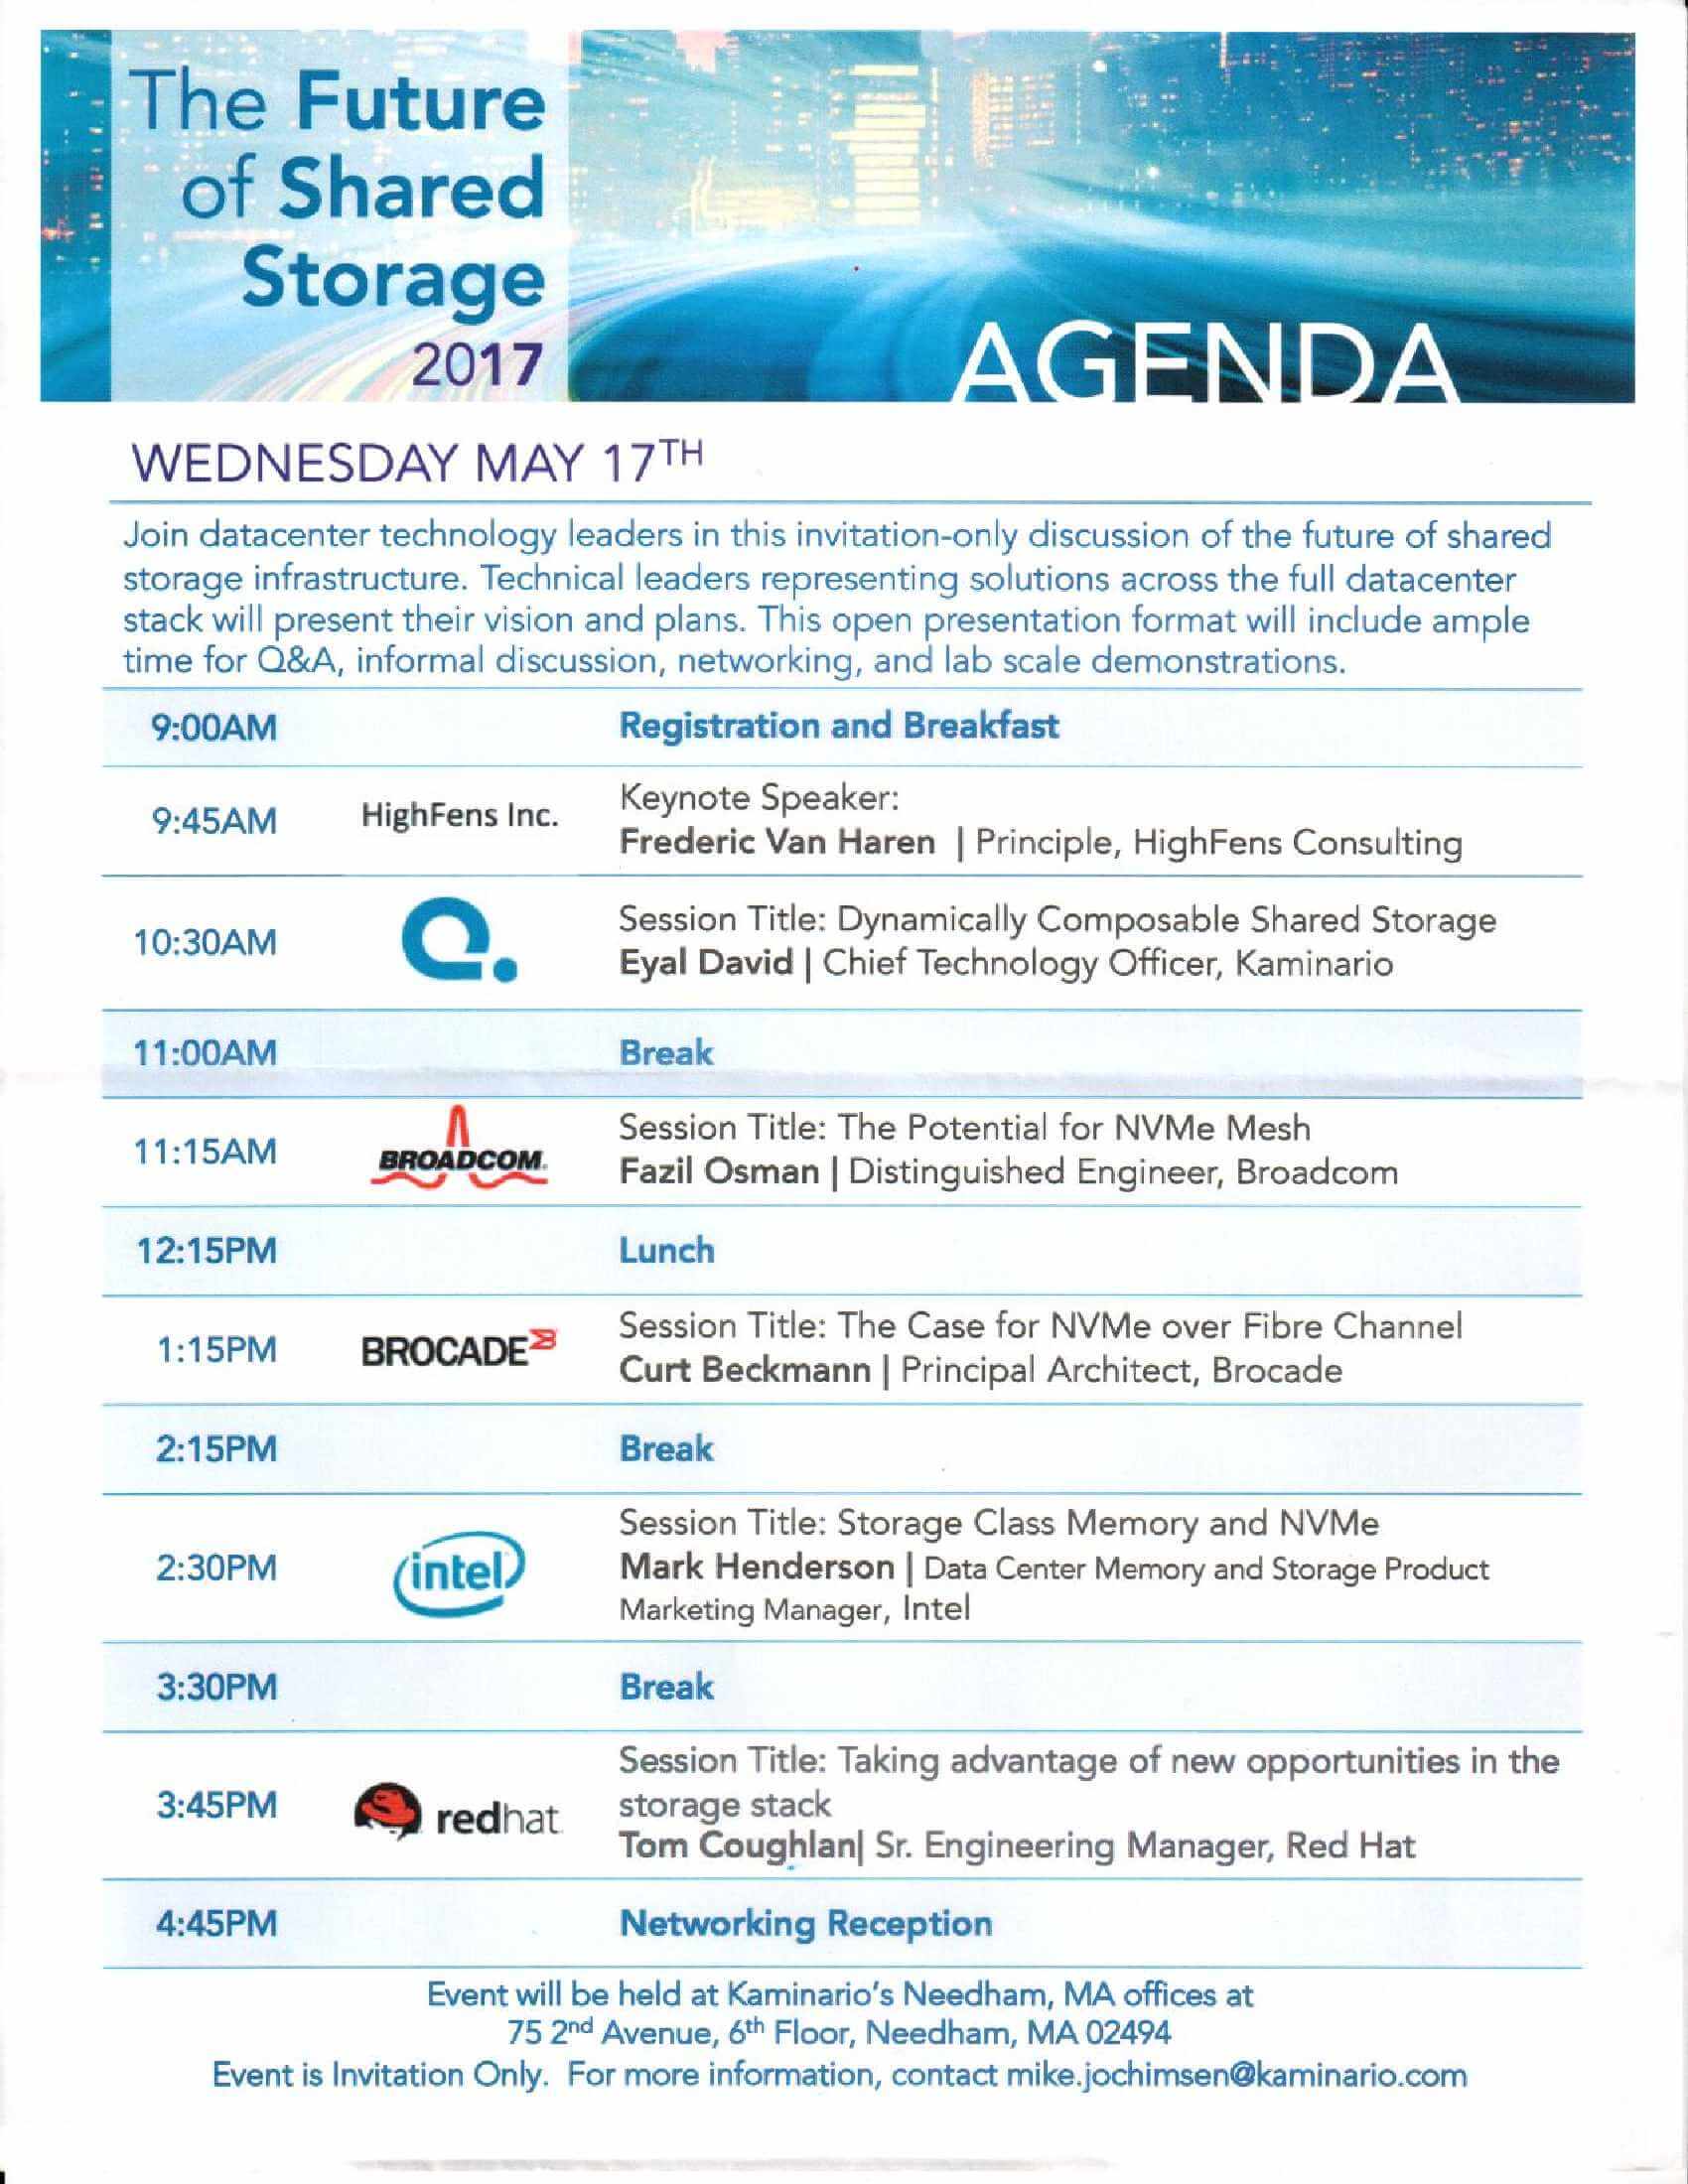 HighFens Inc - Agenda - The Future of Cloud-Scale Application Infrastructure